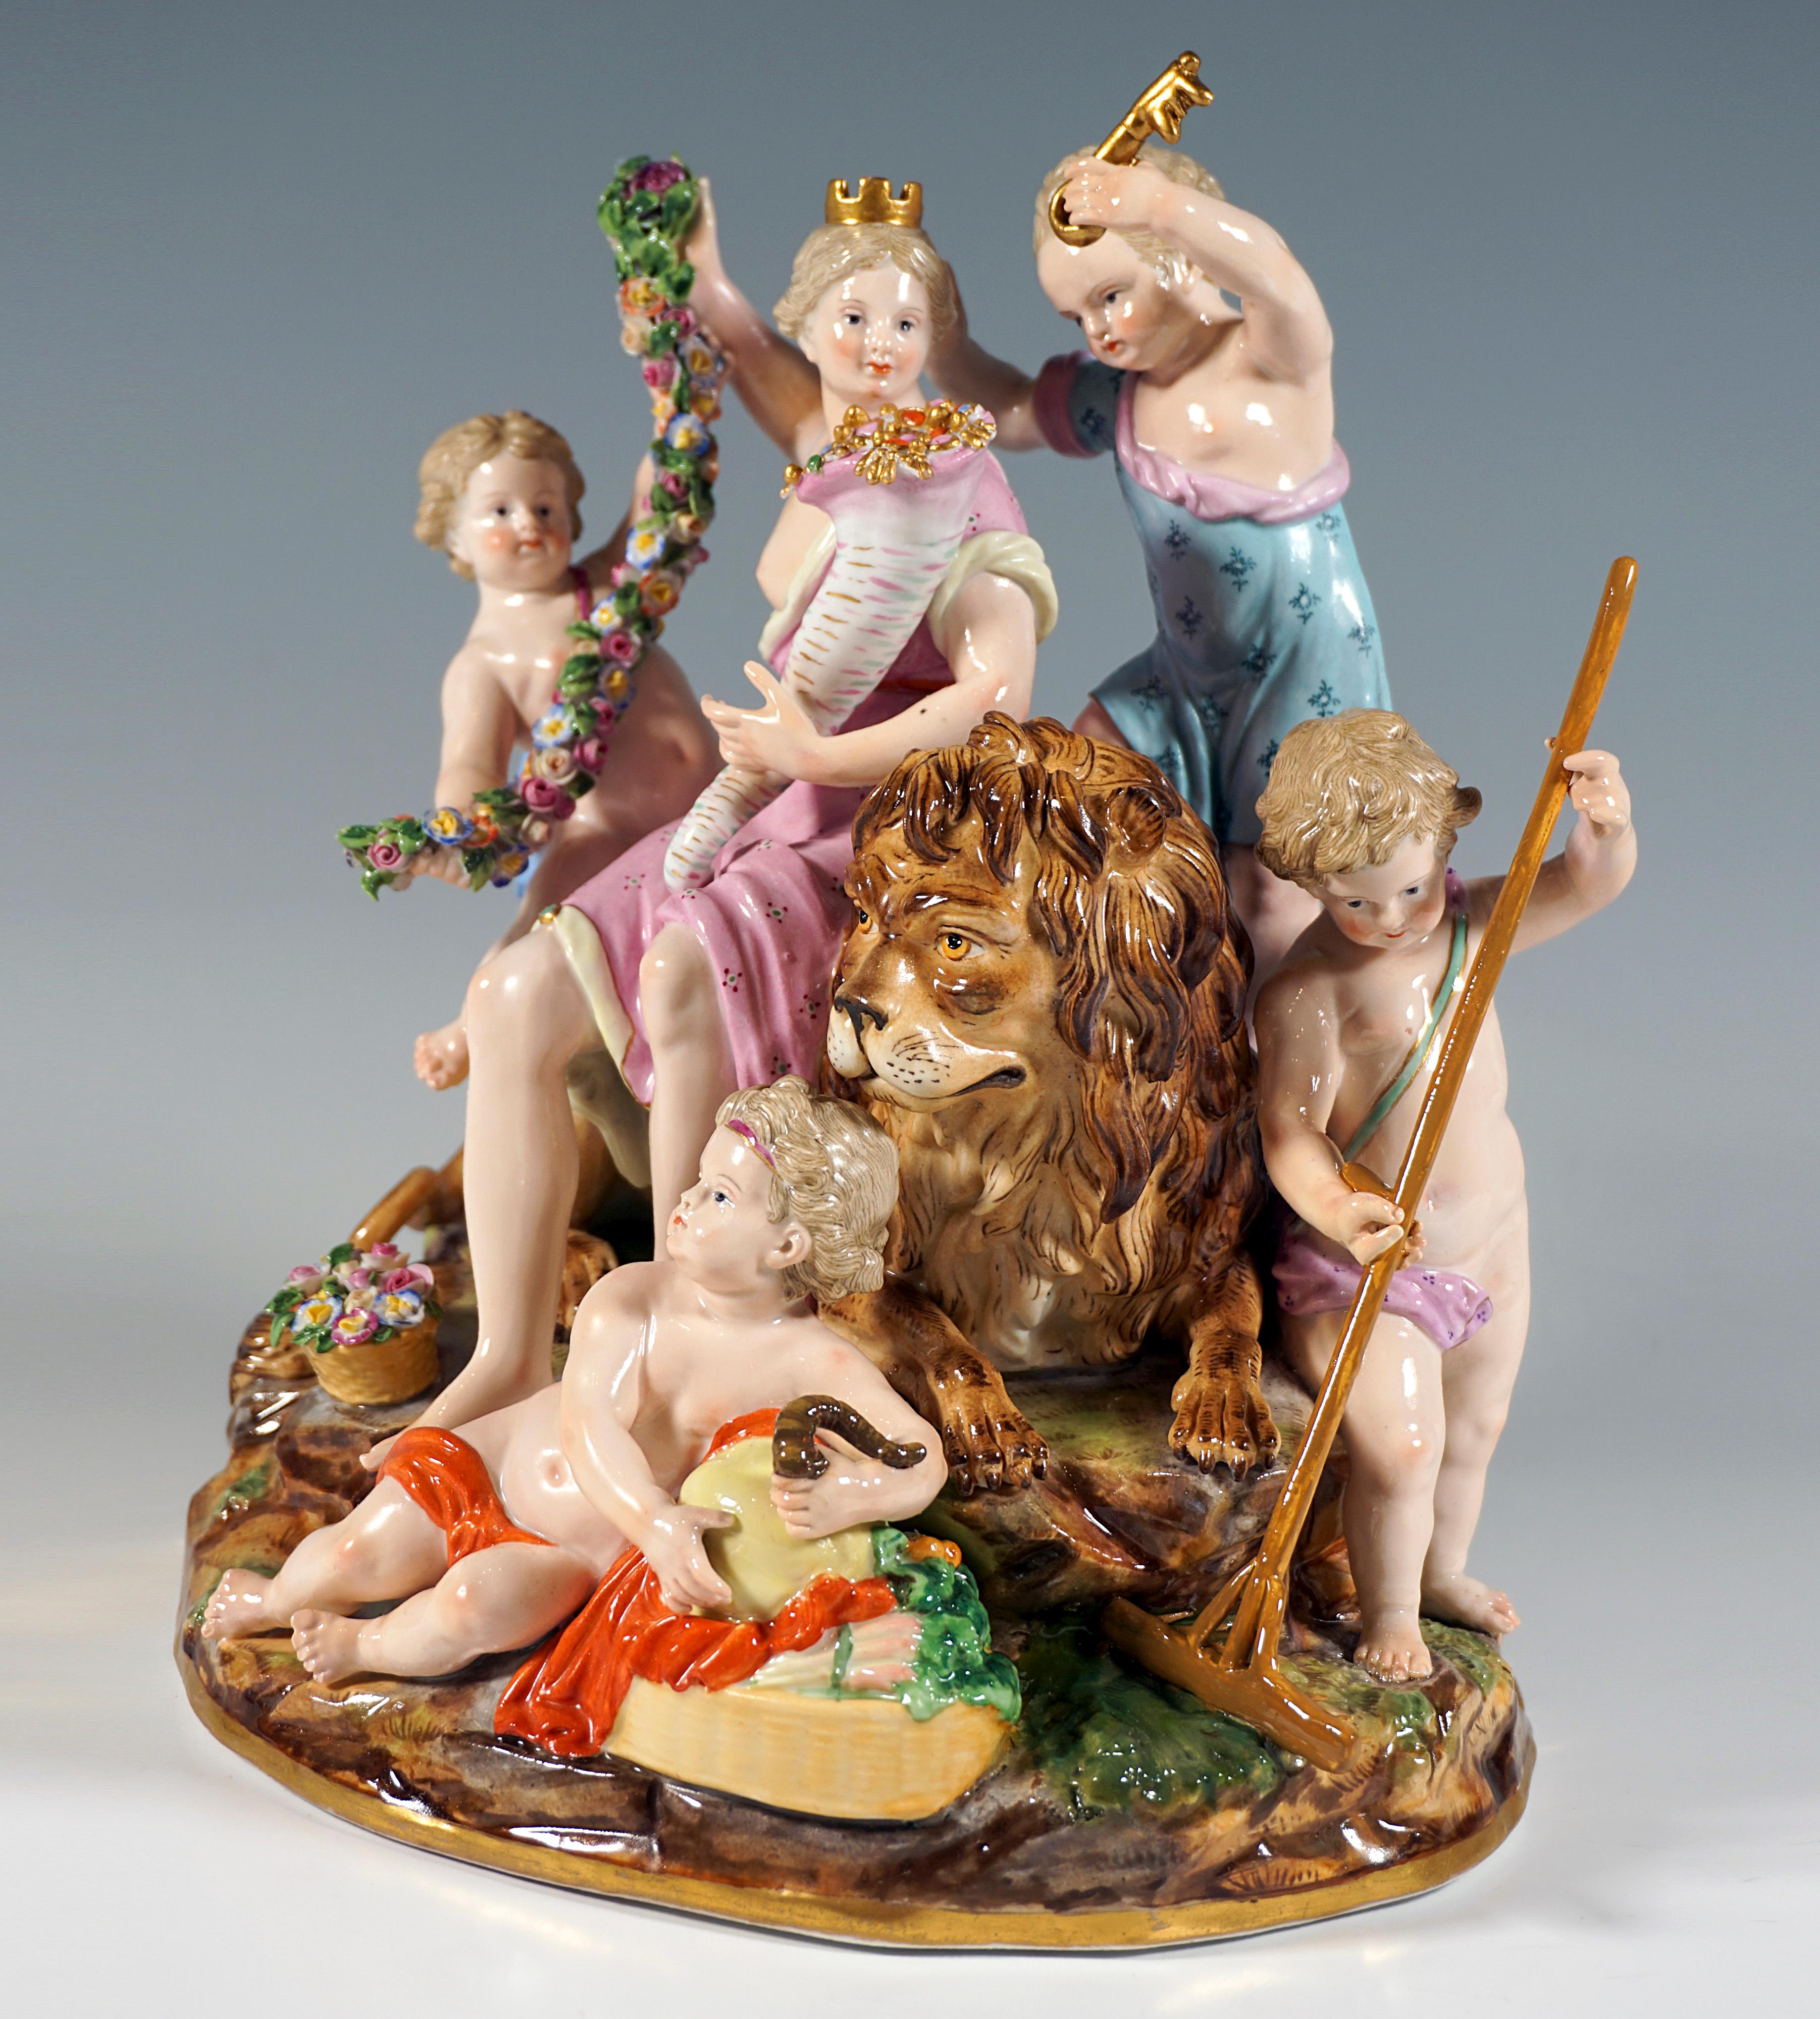 Excellent Meissen porcelain group of the 19th century:
Depiction of the goddess Kybele, the great Phrygian mother of the gods 'Magna Mater', seated with a mural crown on a reclining lion, holding a cornucopia on her lap, symbol of wealth and